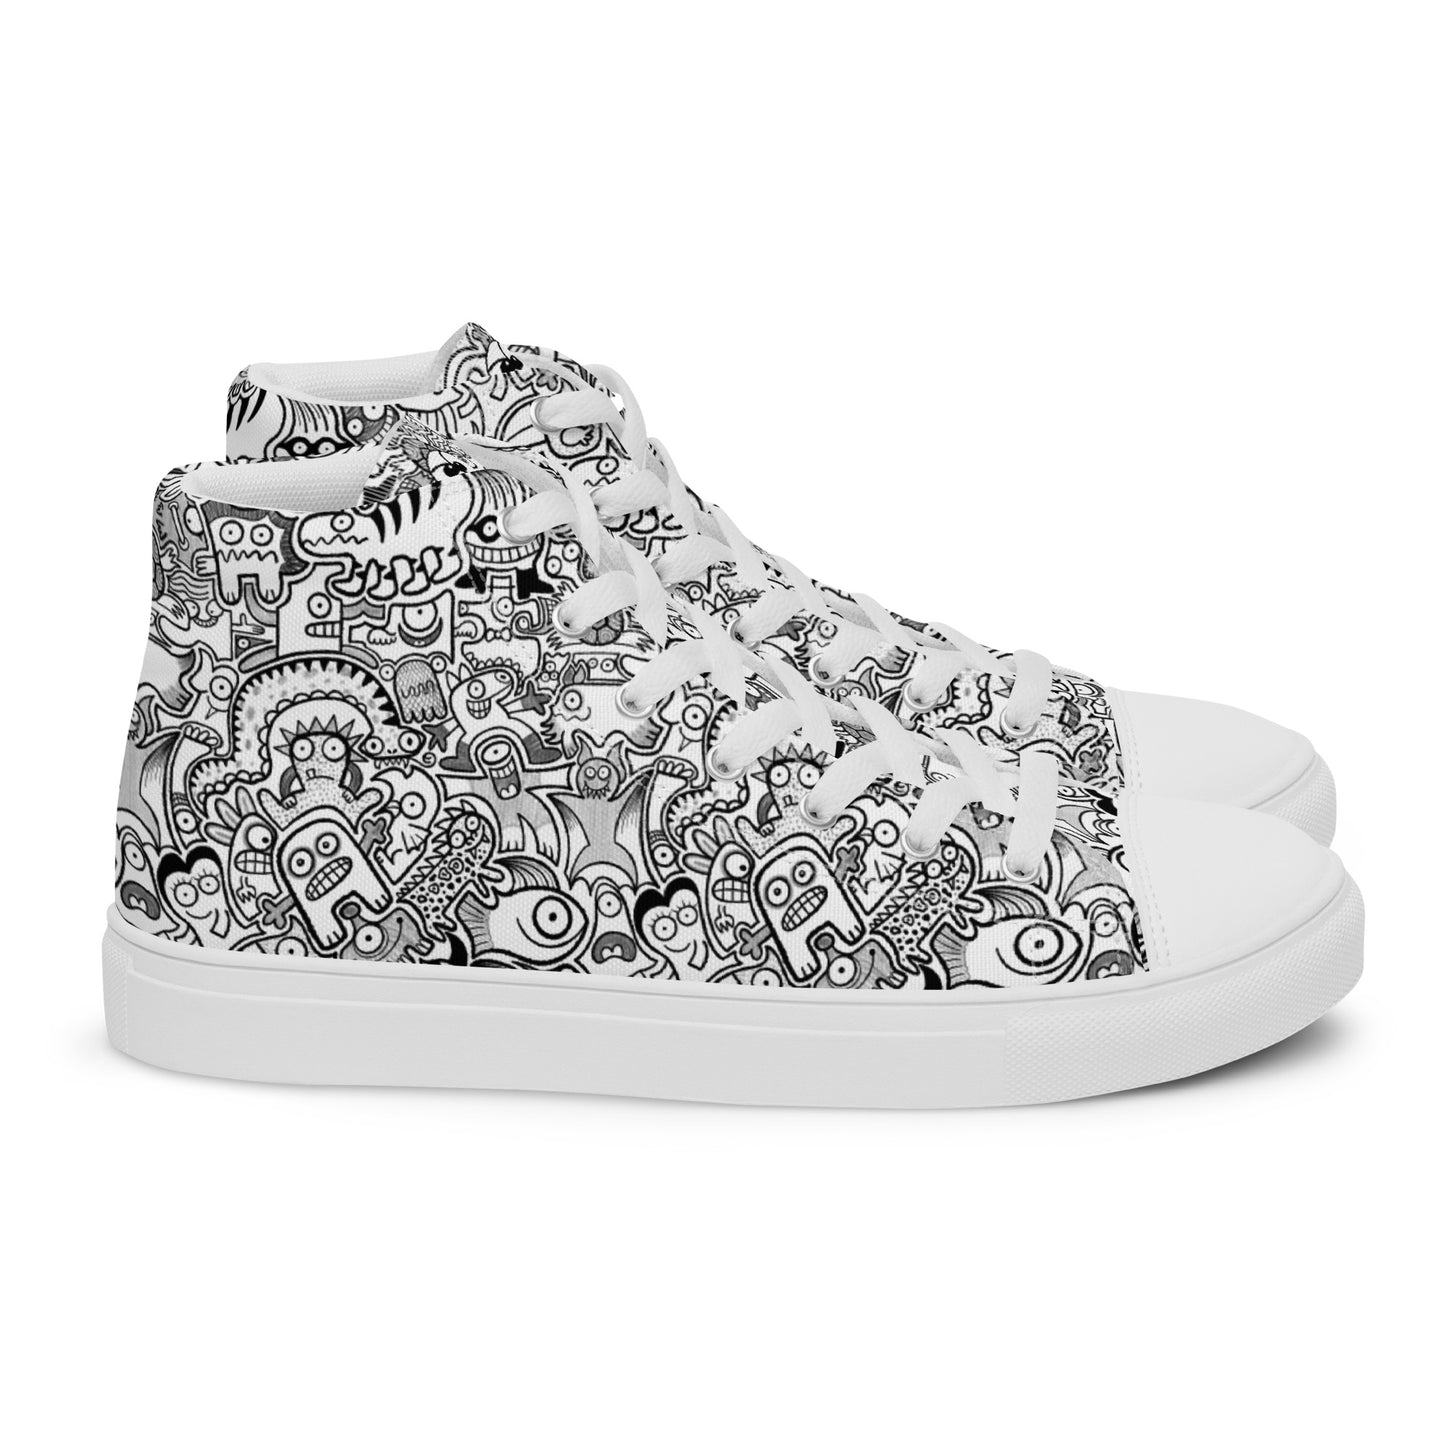 Fill your world with cool doodles Women’s high top canvas shoes. Side view